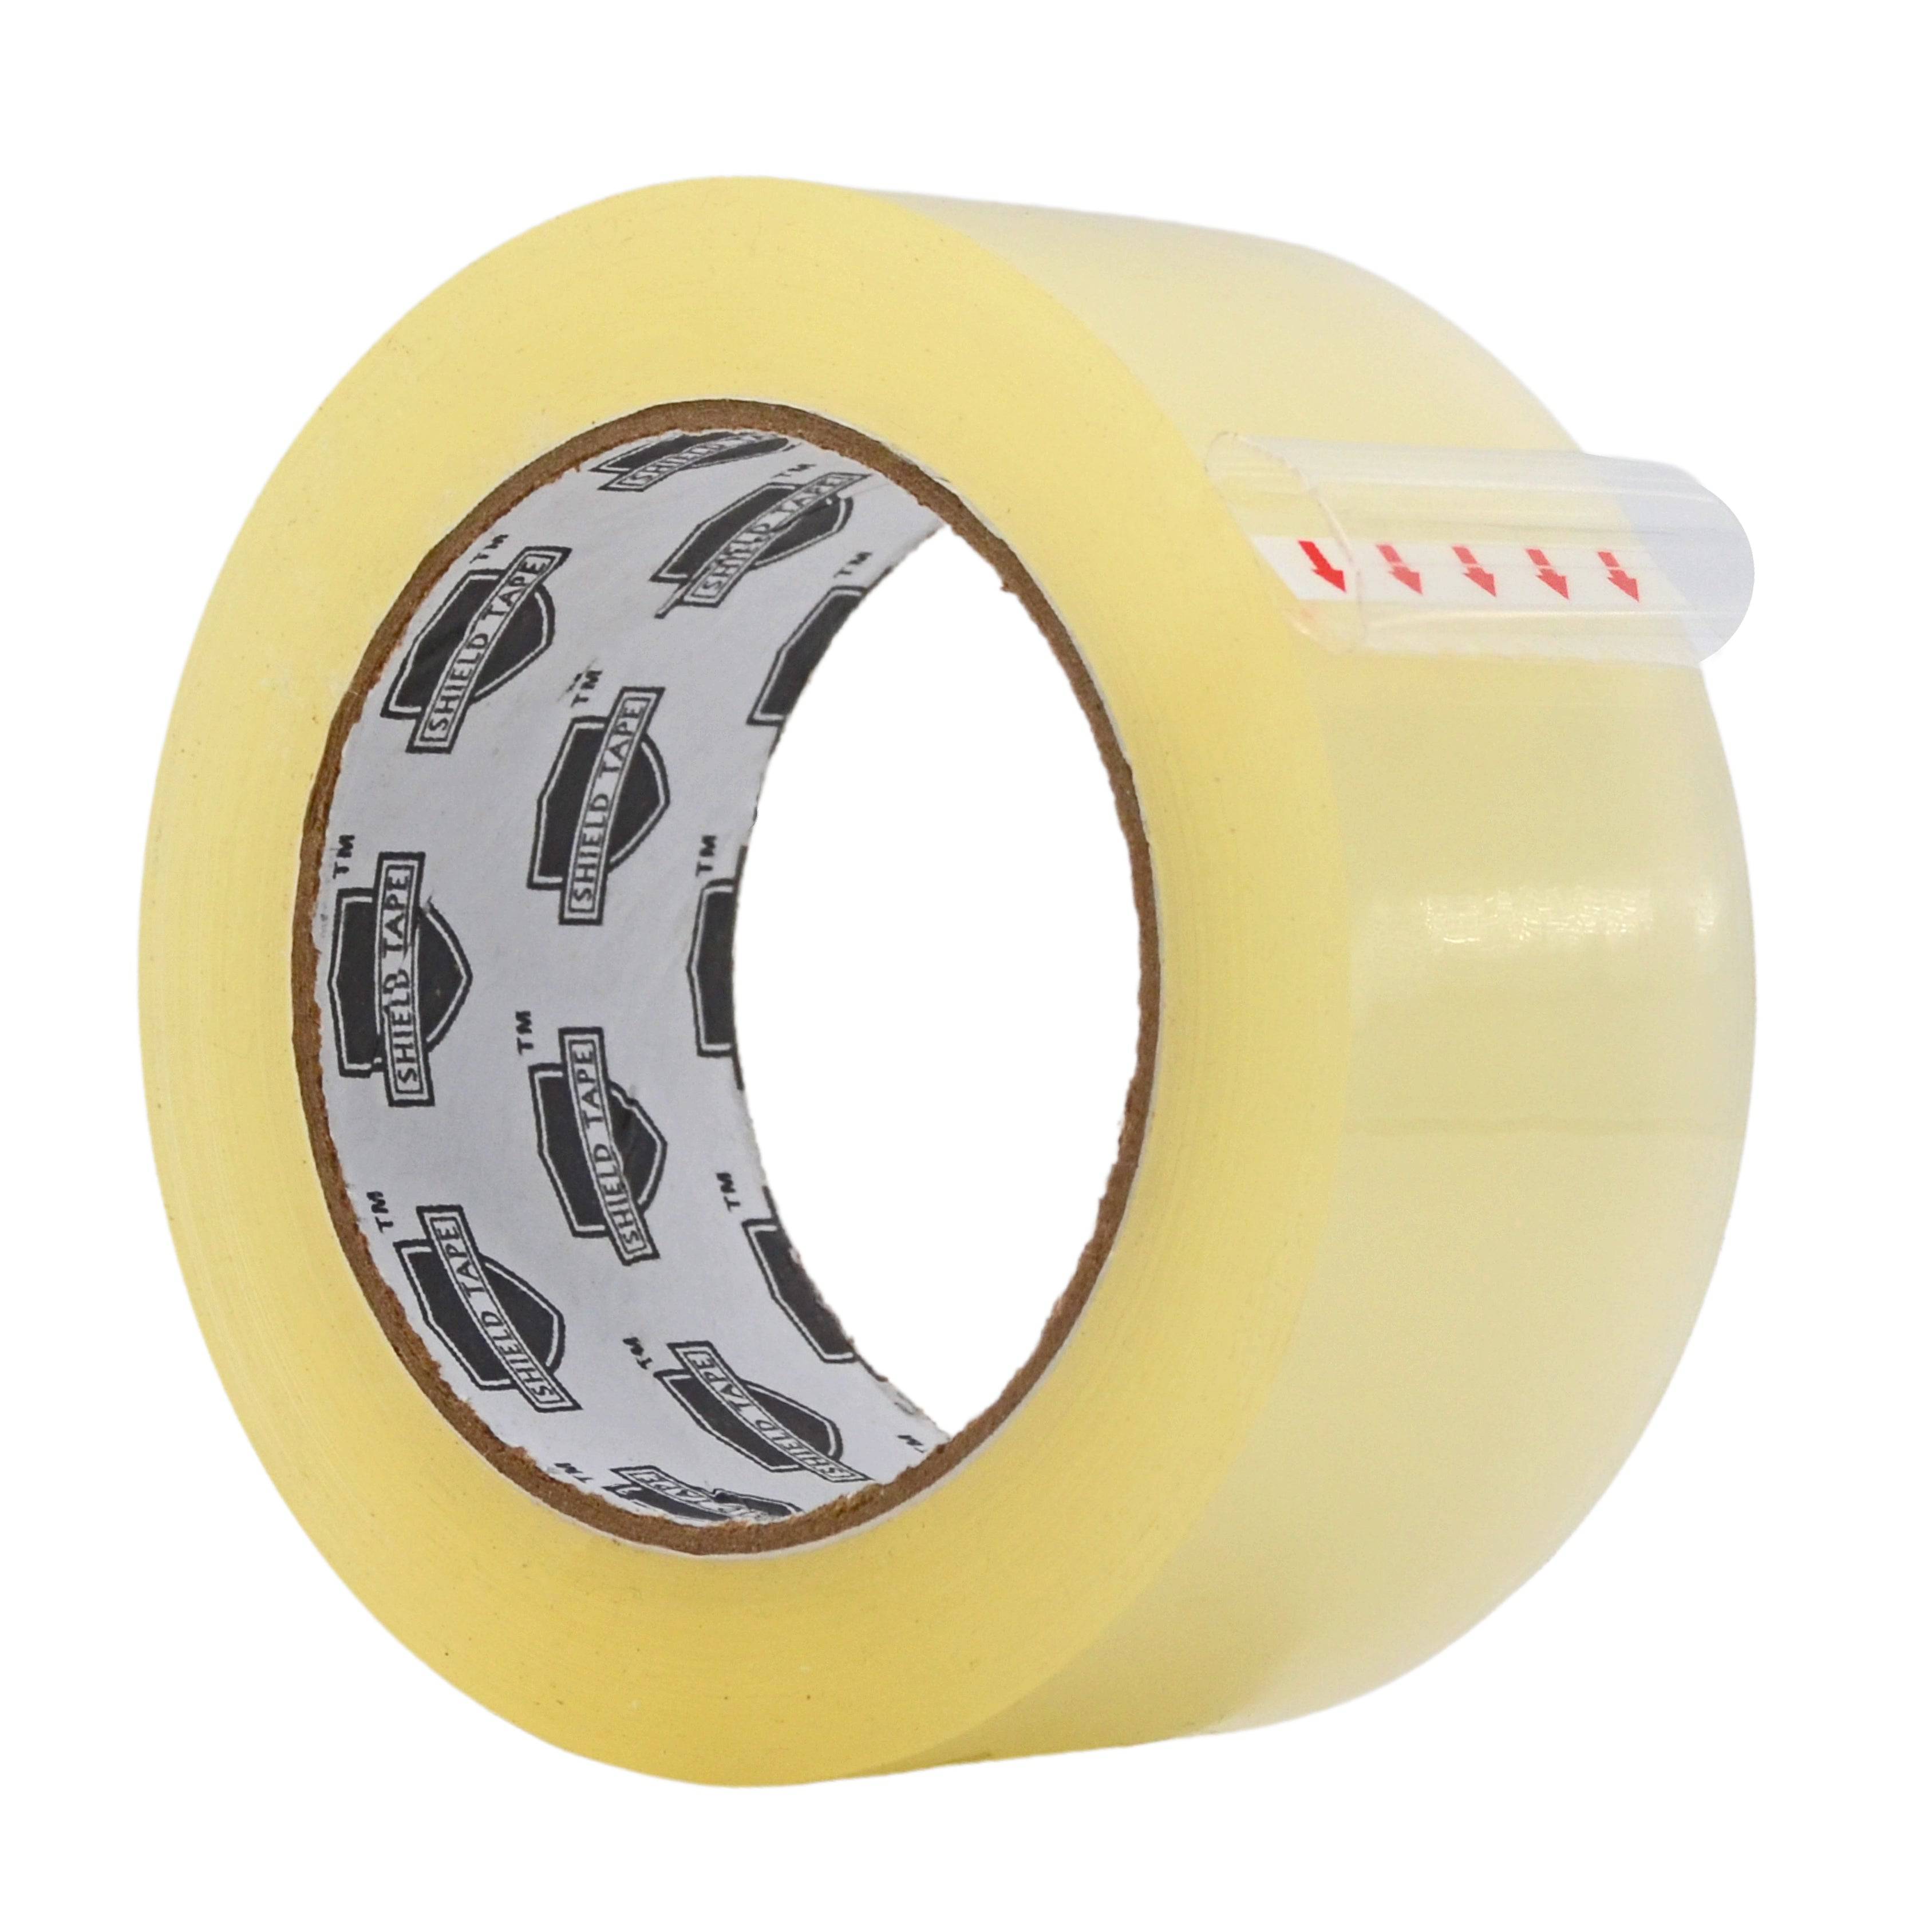 Clear Carton Sealing Tape, Industrial, 3 x 110 yds., 2.6 Mil Thick